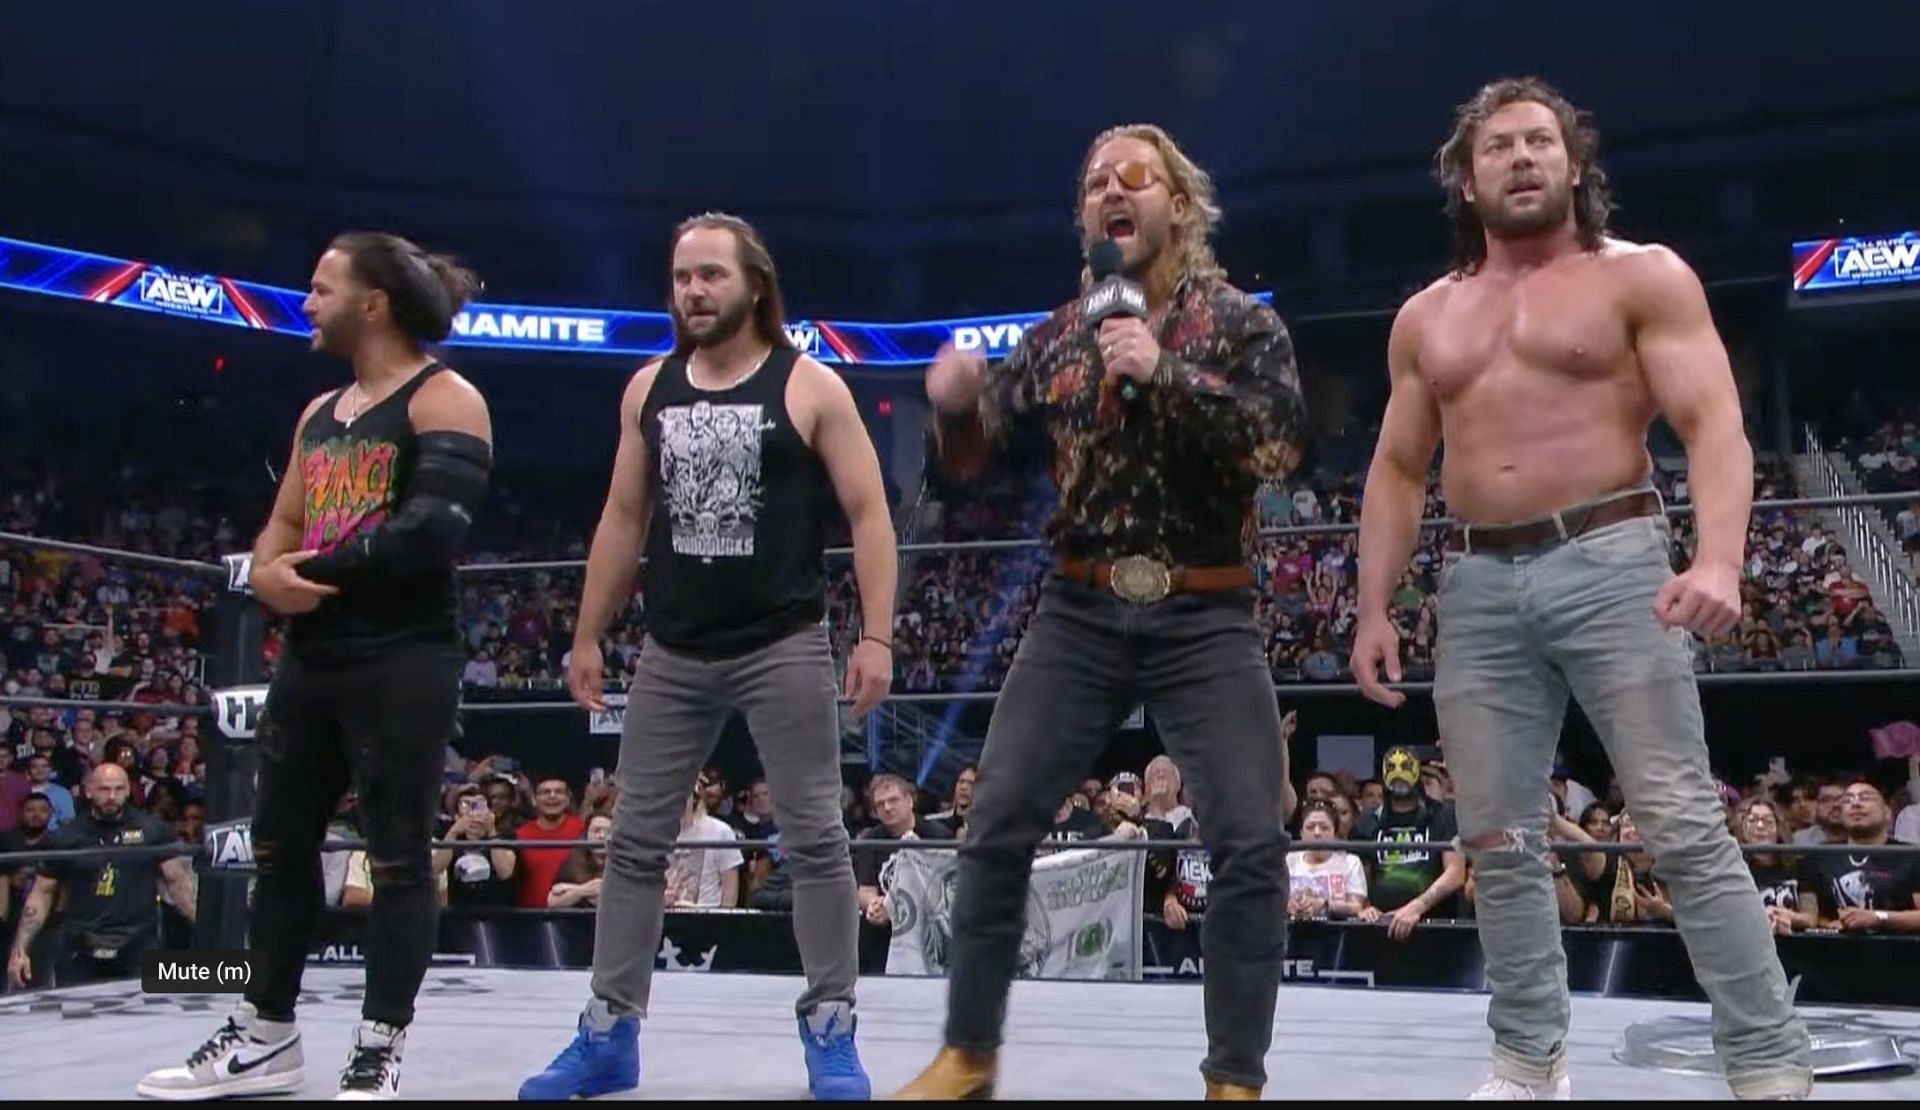 The Elite are one of the most popular factions in AEW